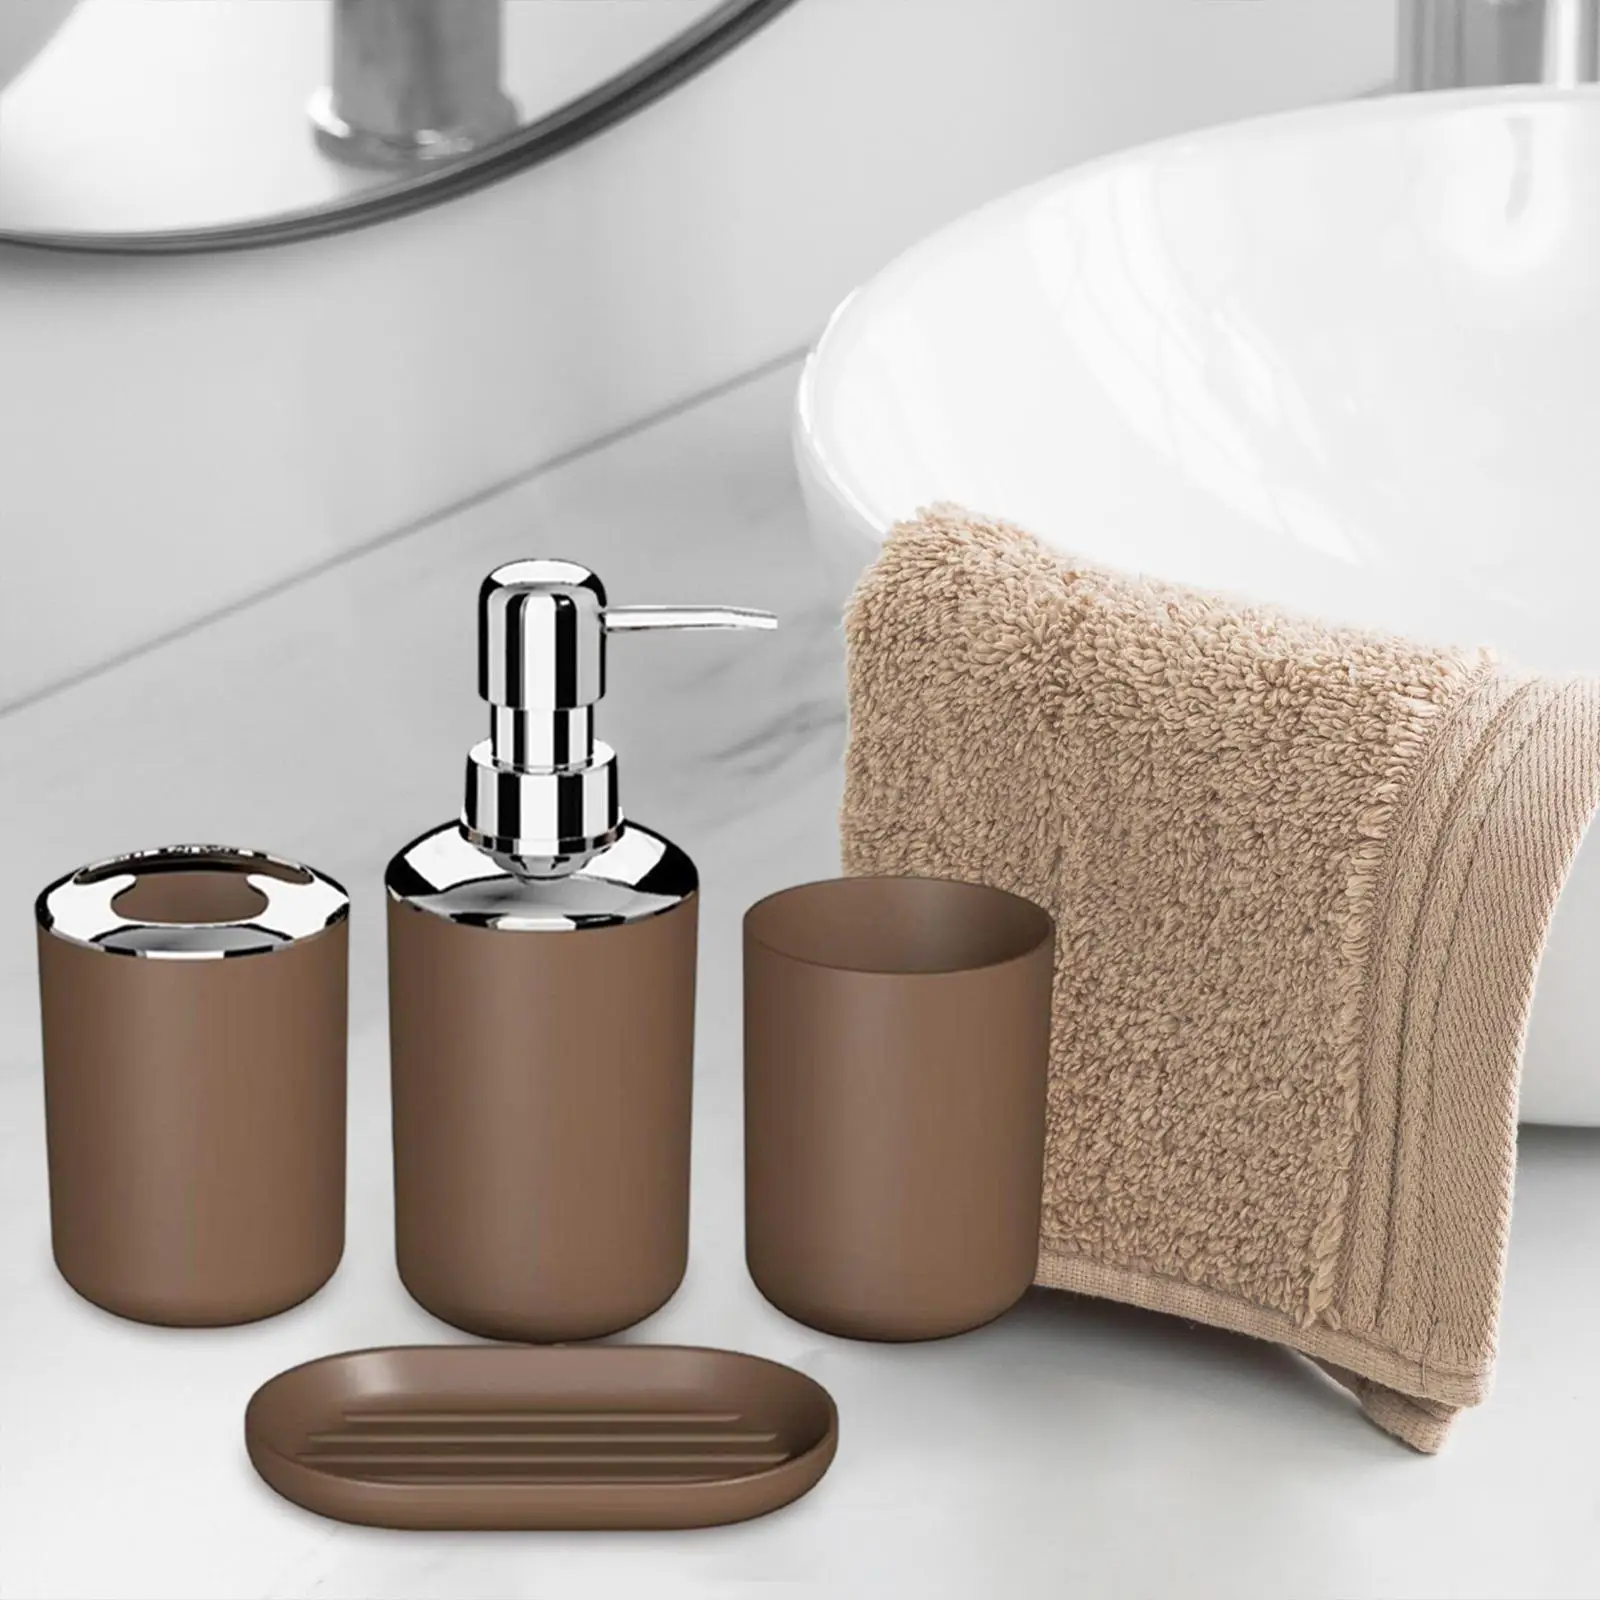 4 Pieces Bathroom Accessories Set & Soap Dish & Tumbler Vanity Organizer & Toothbrush Holder for Office Buildings Apartment